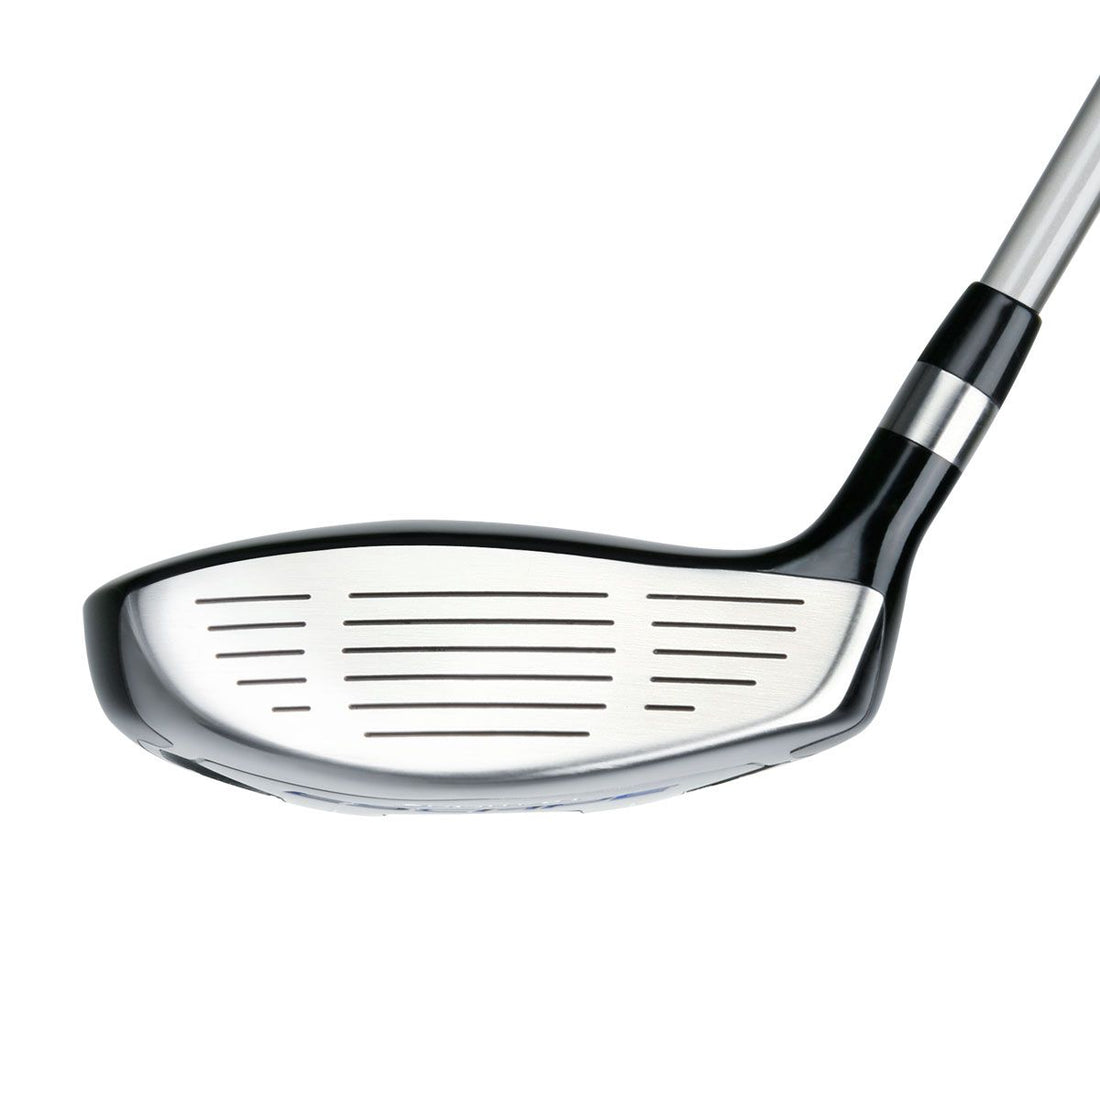 face view of an Orlimar Golf Escape Fairway Wood